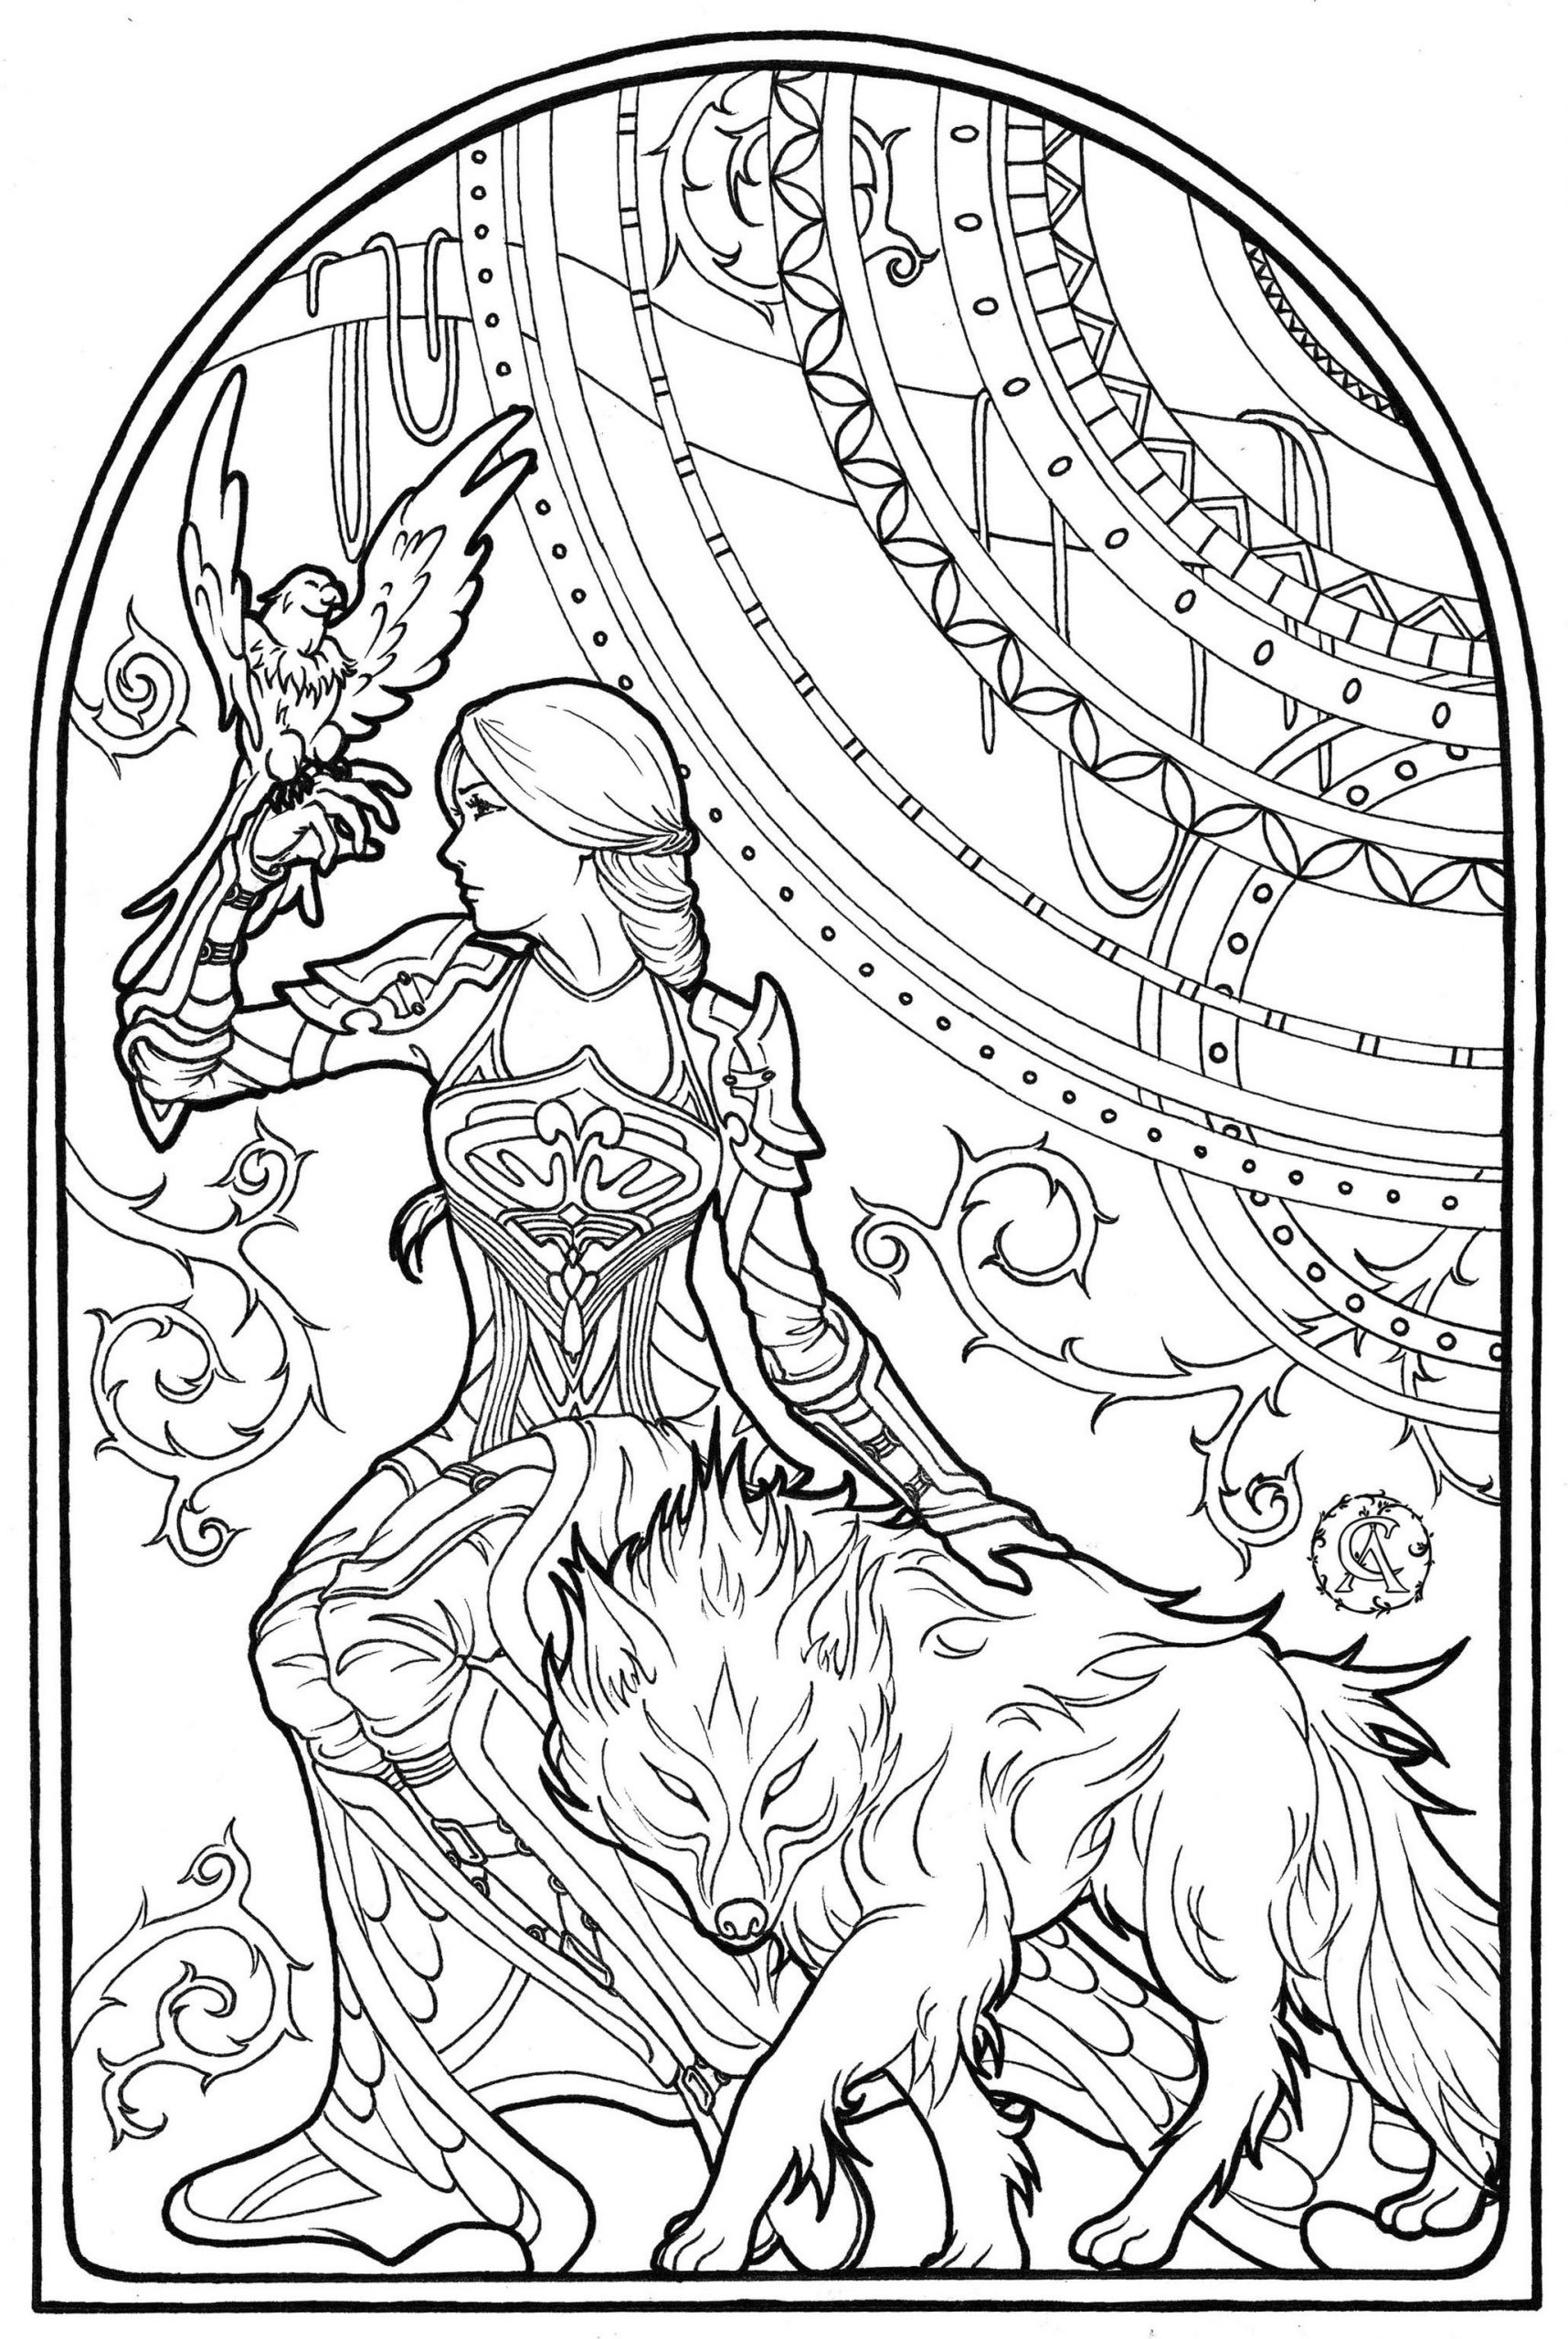 20+ Free Printable Adult Fantasy Coloring Pages   EverFreeColoring.com